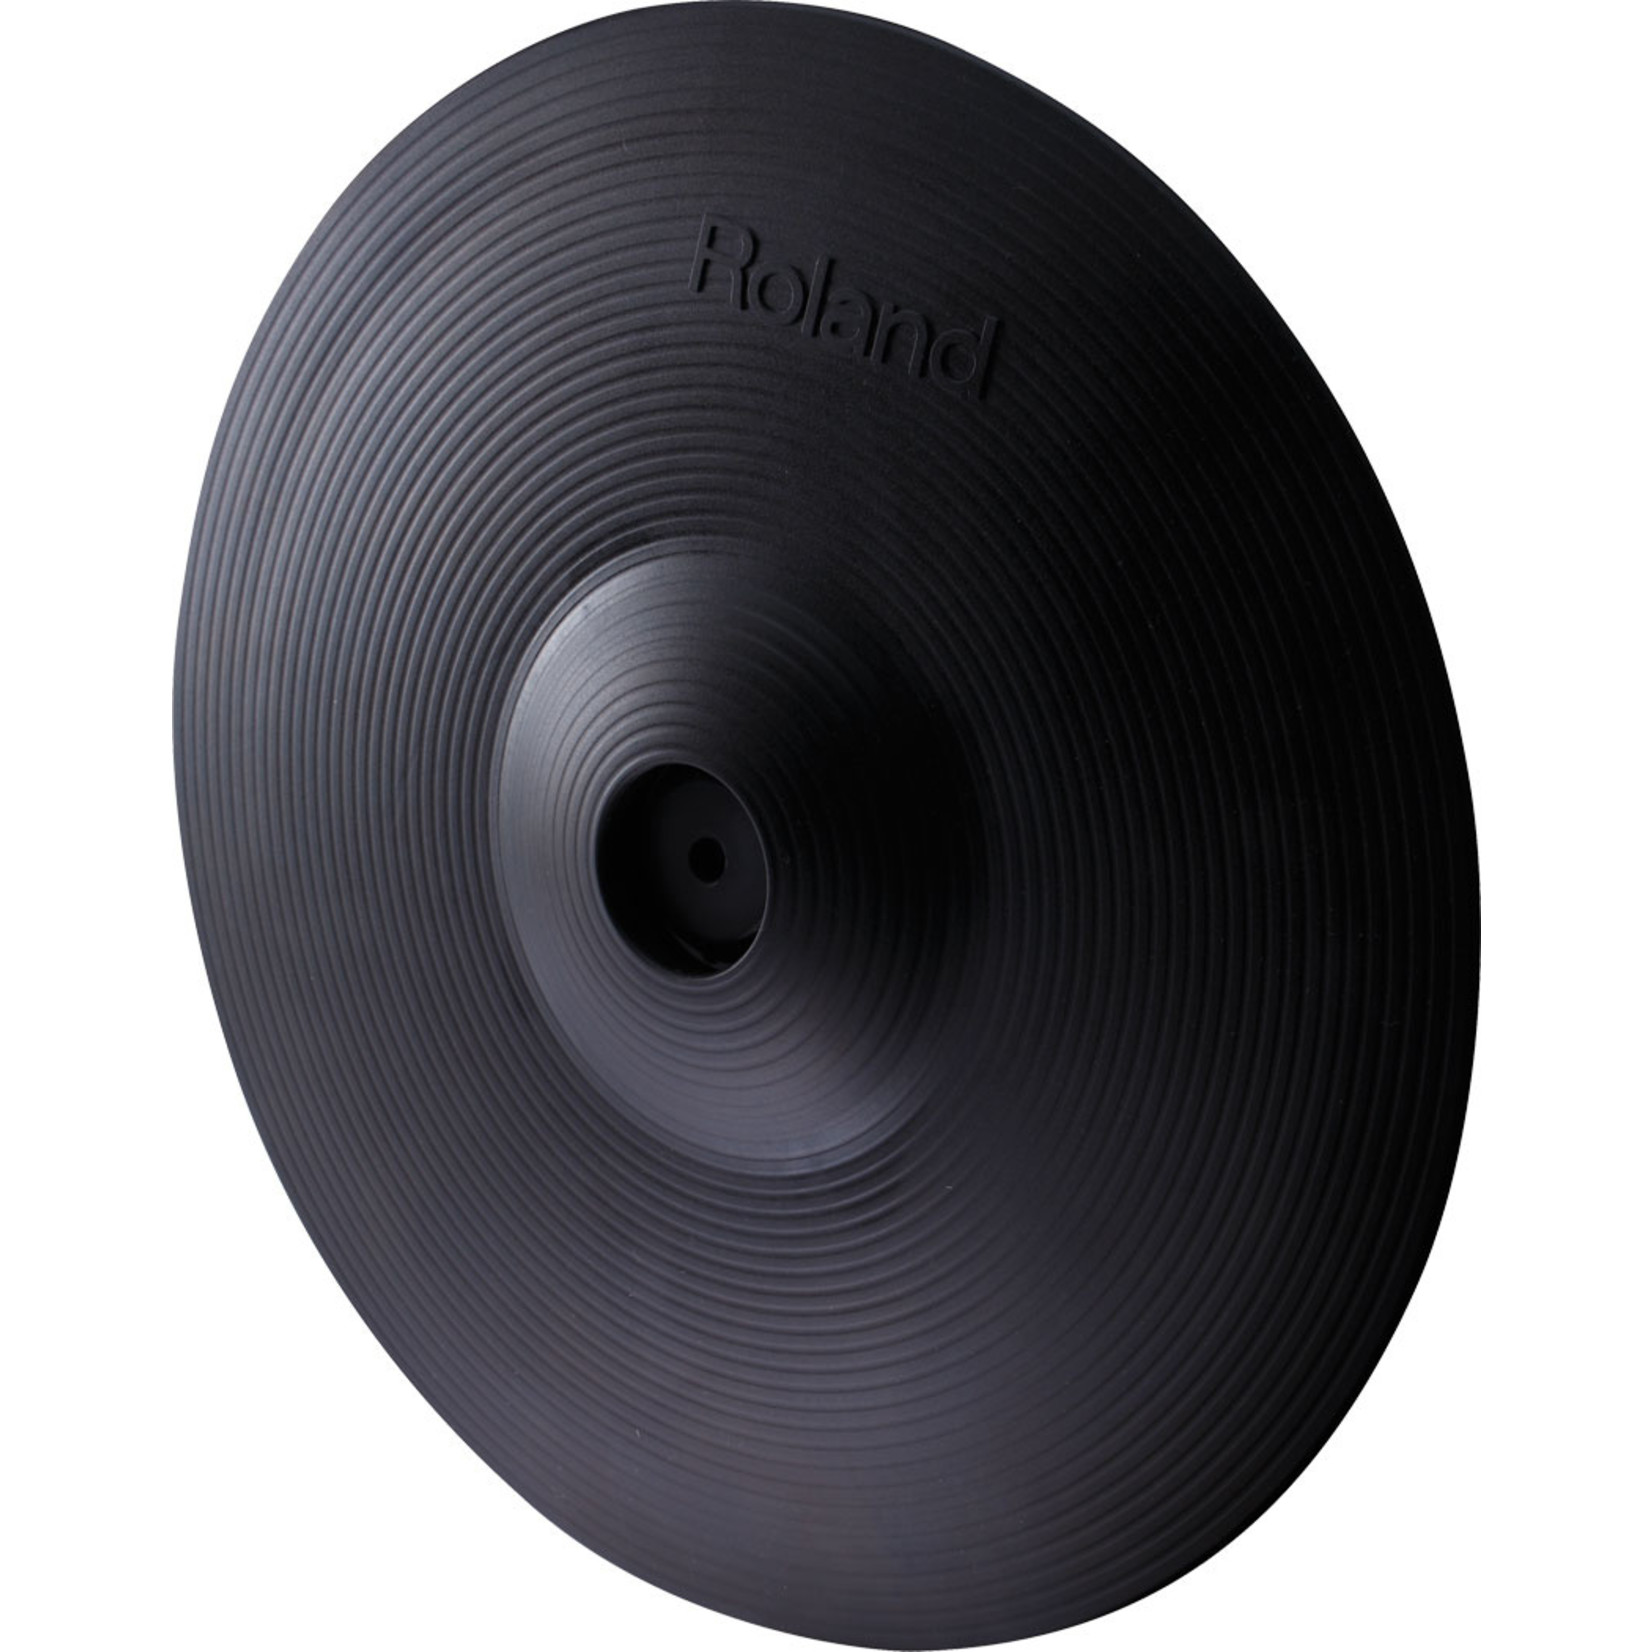 Roland 13 in. V-Cymbal Ride